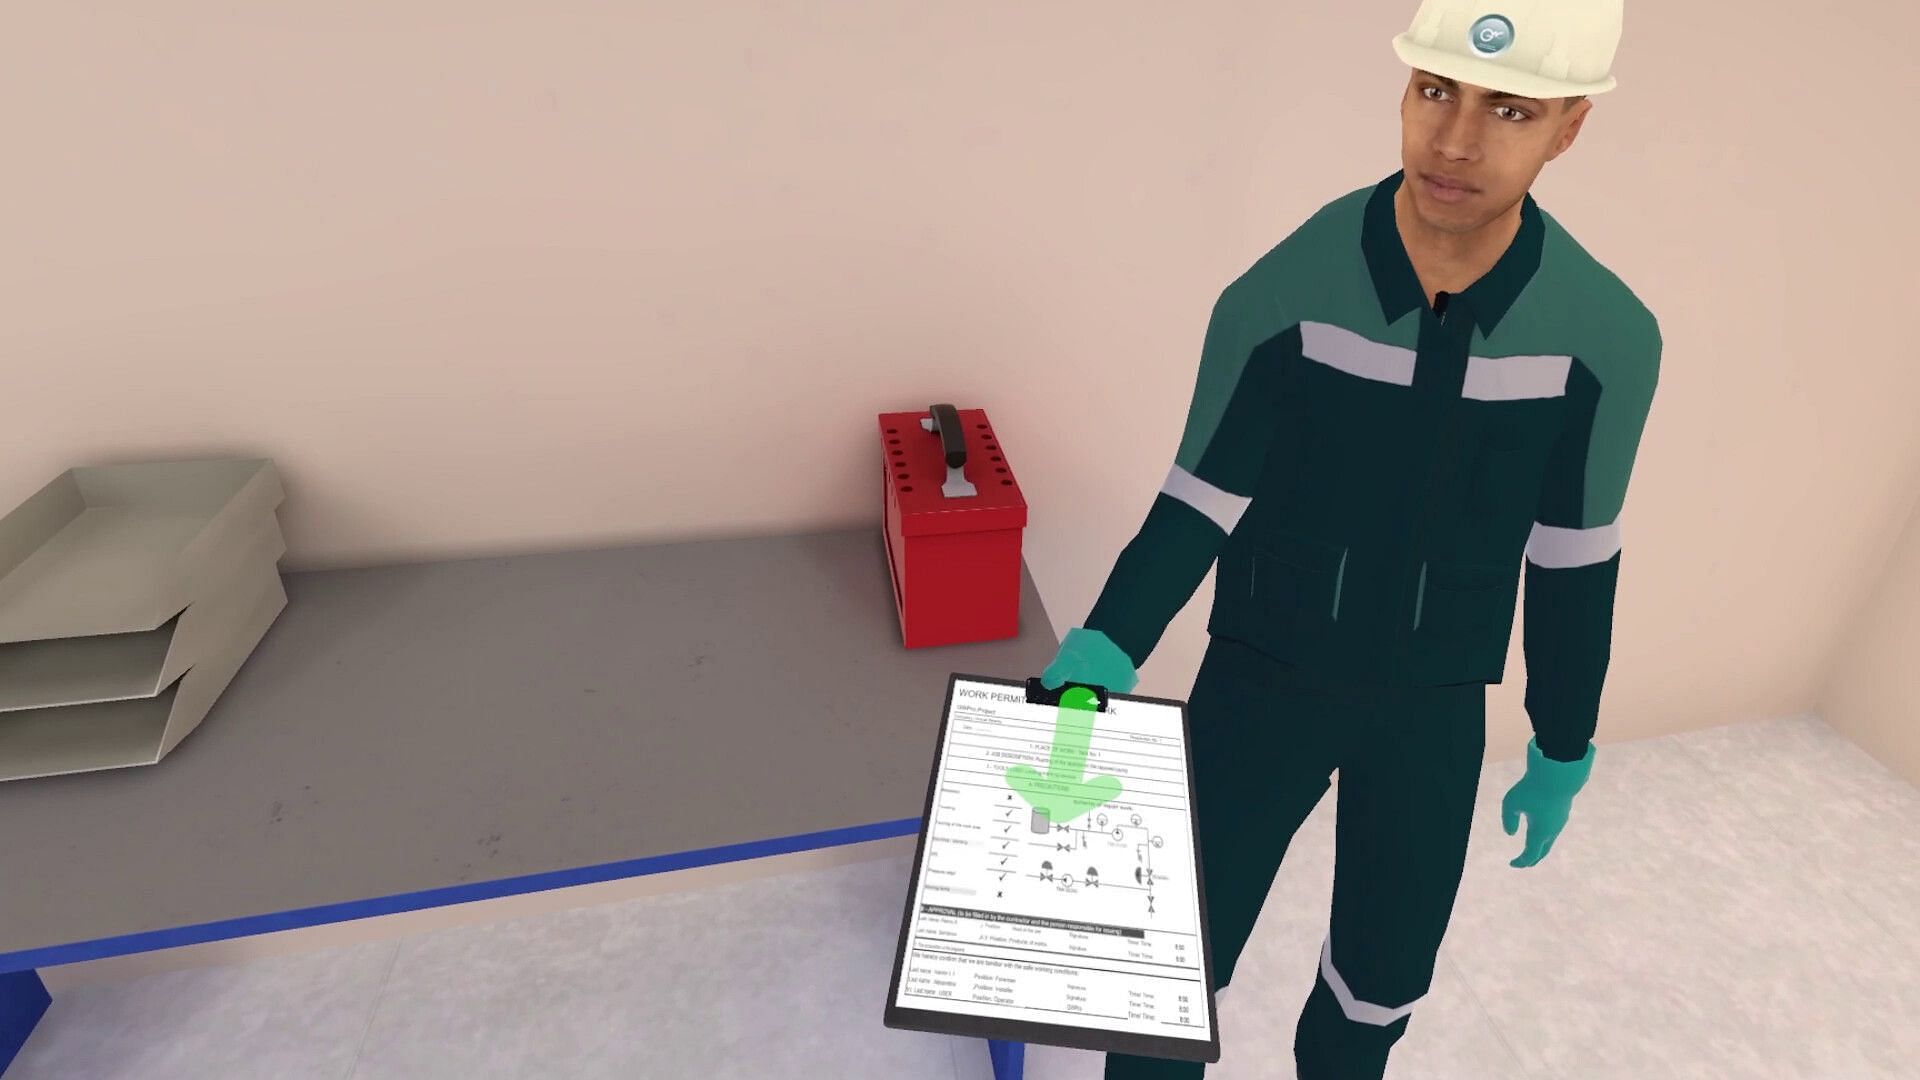 Maintenance Safety (Pipes and Acids) VR Training (Image via GVR Training Computer Software)